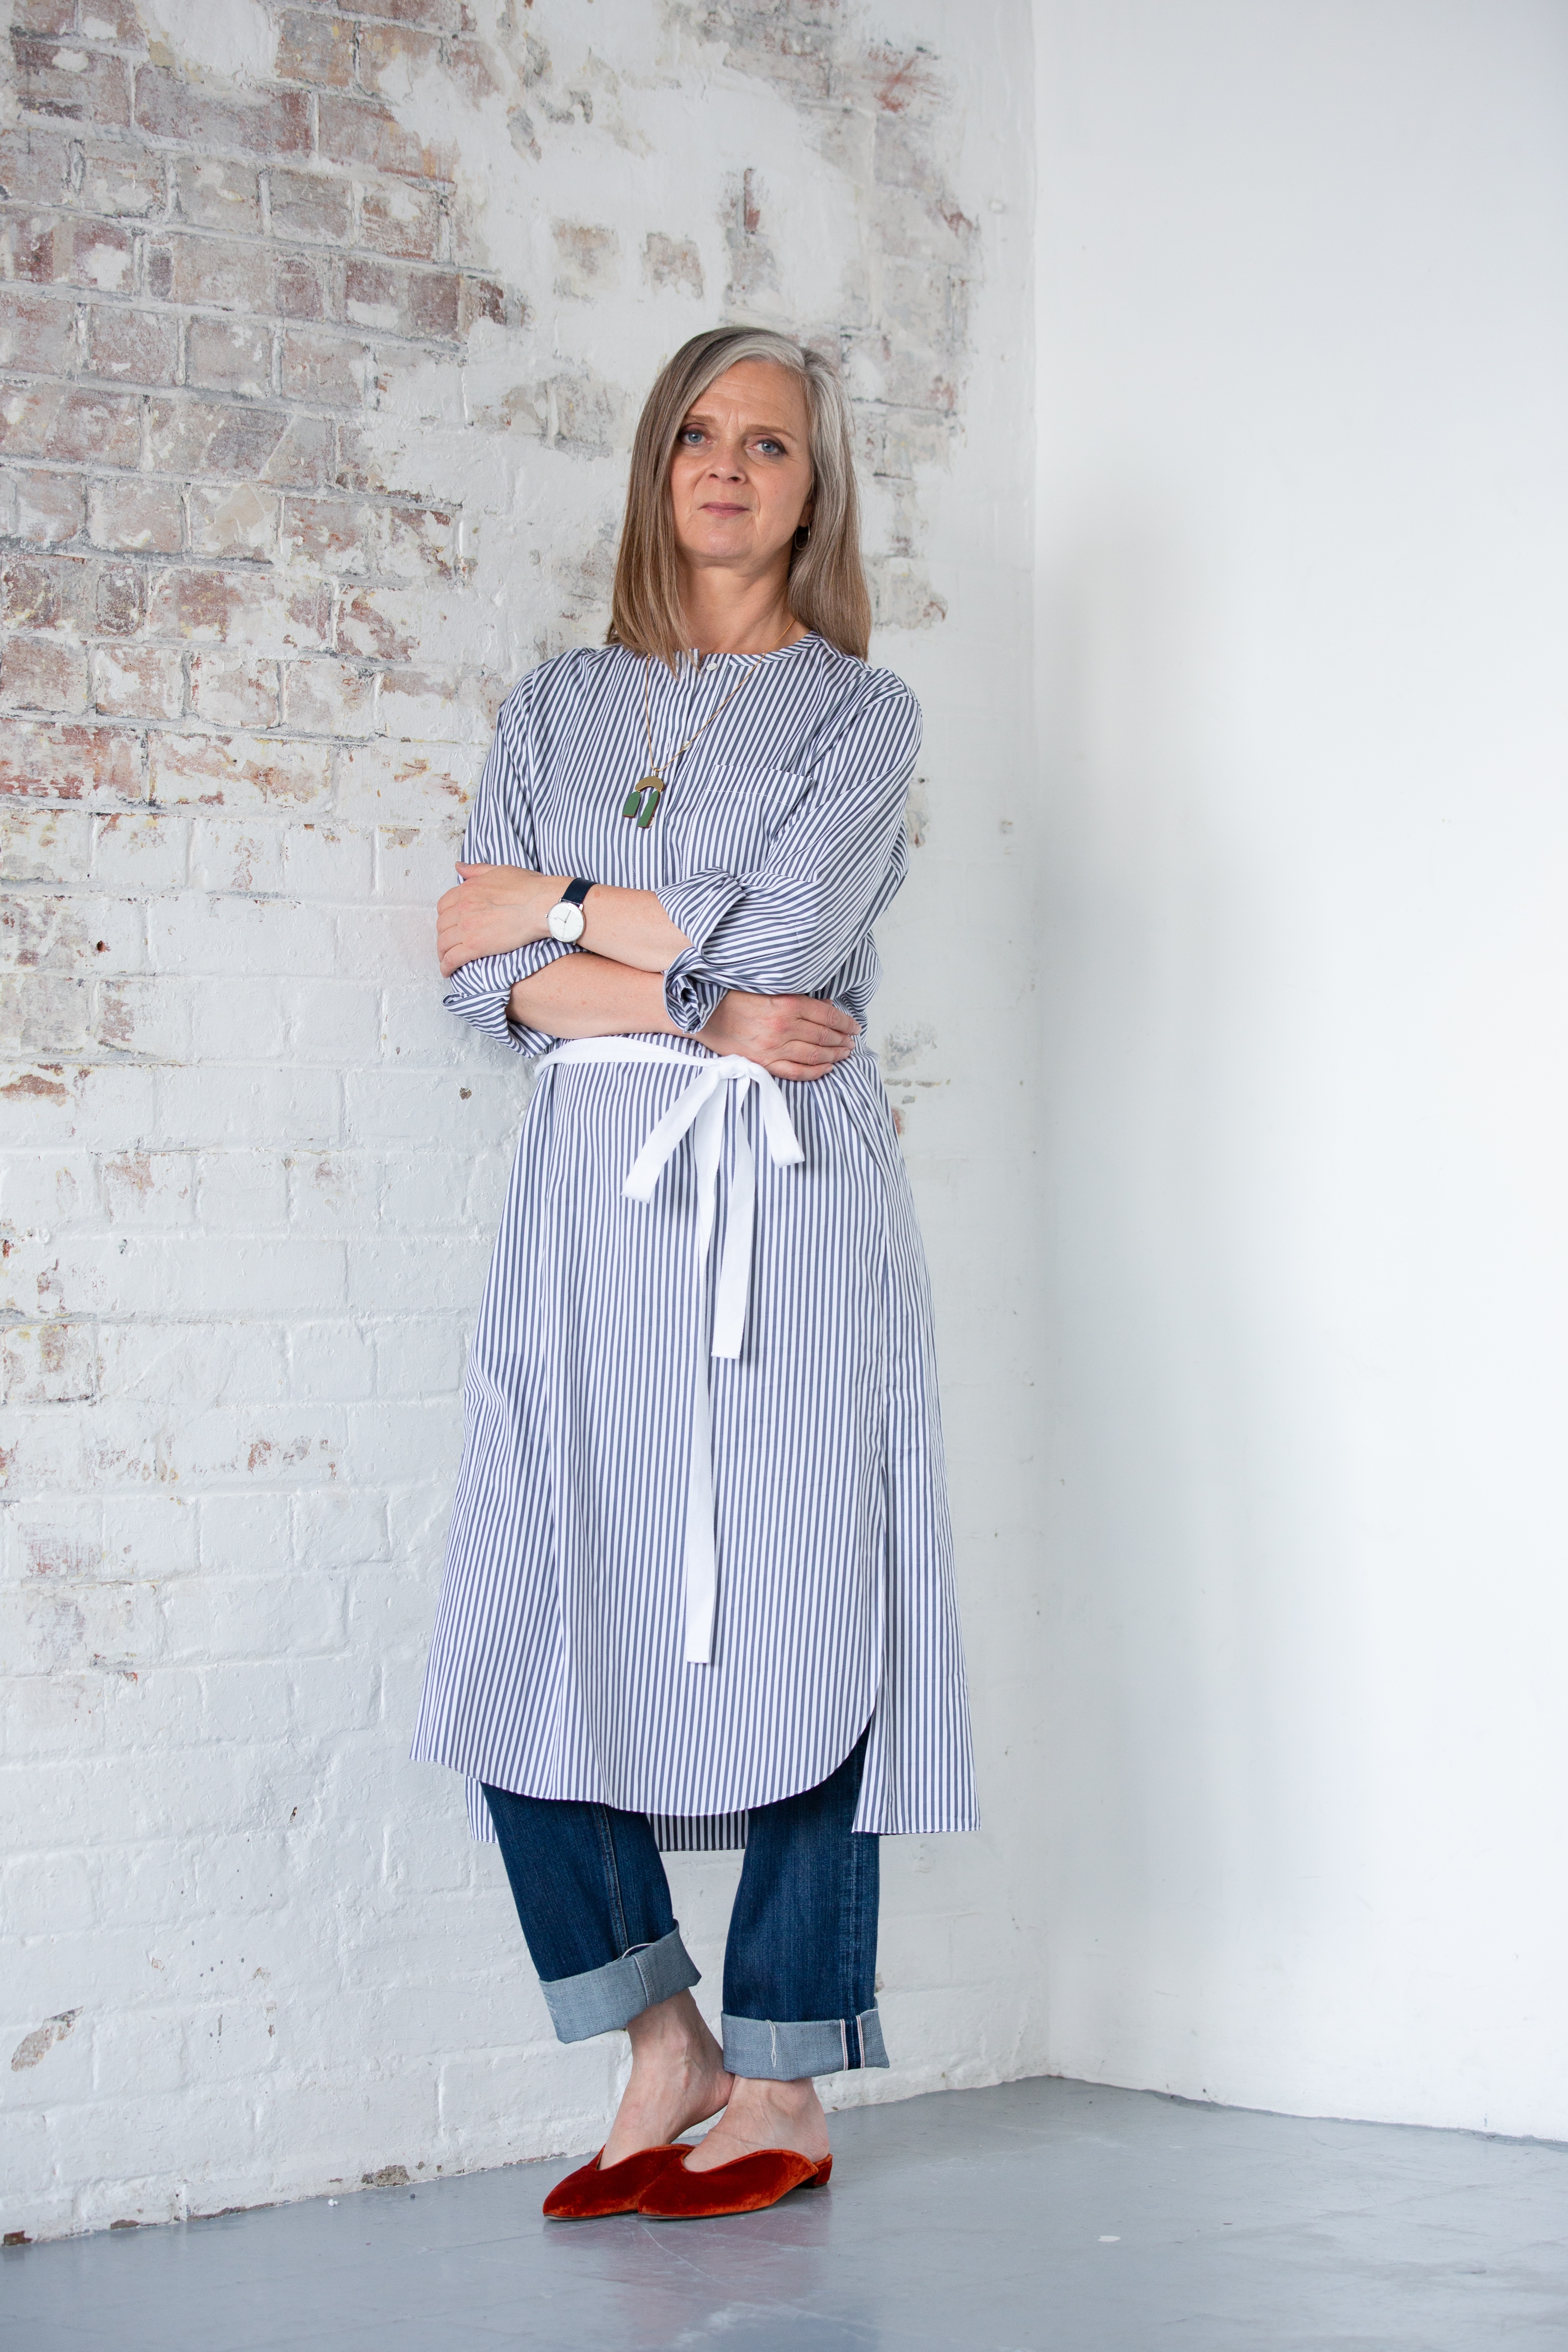 shirt dress with jeans